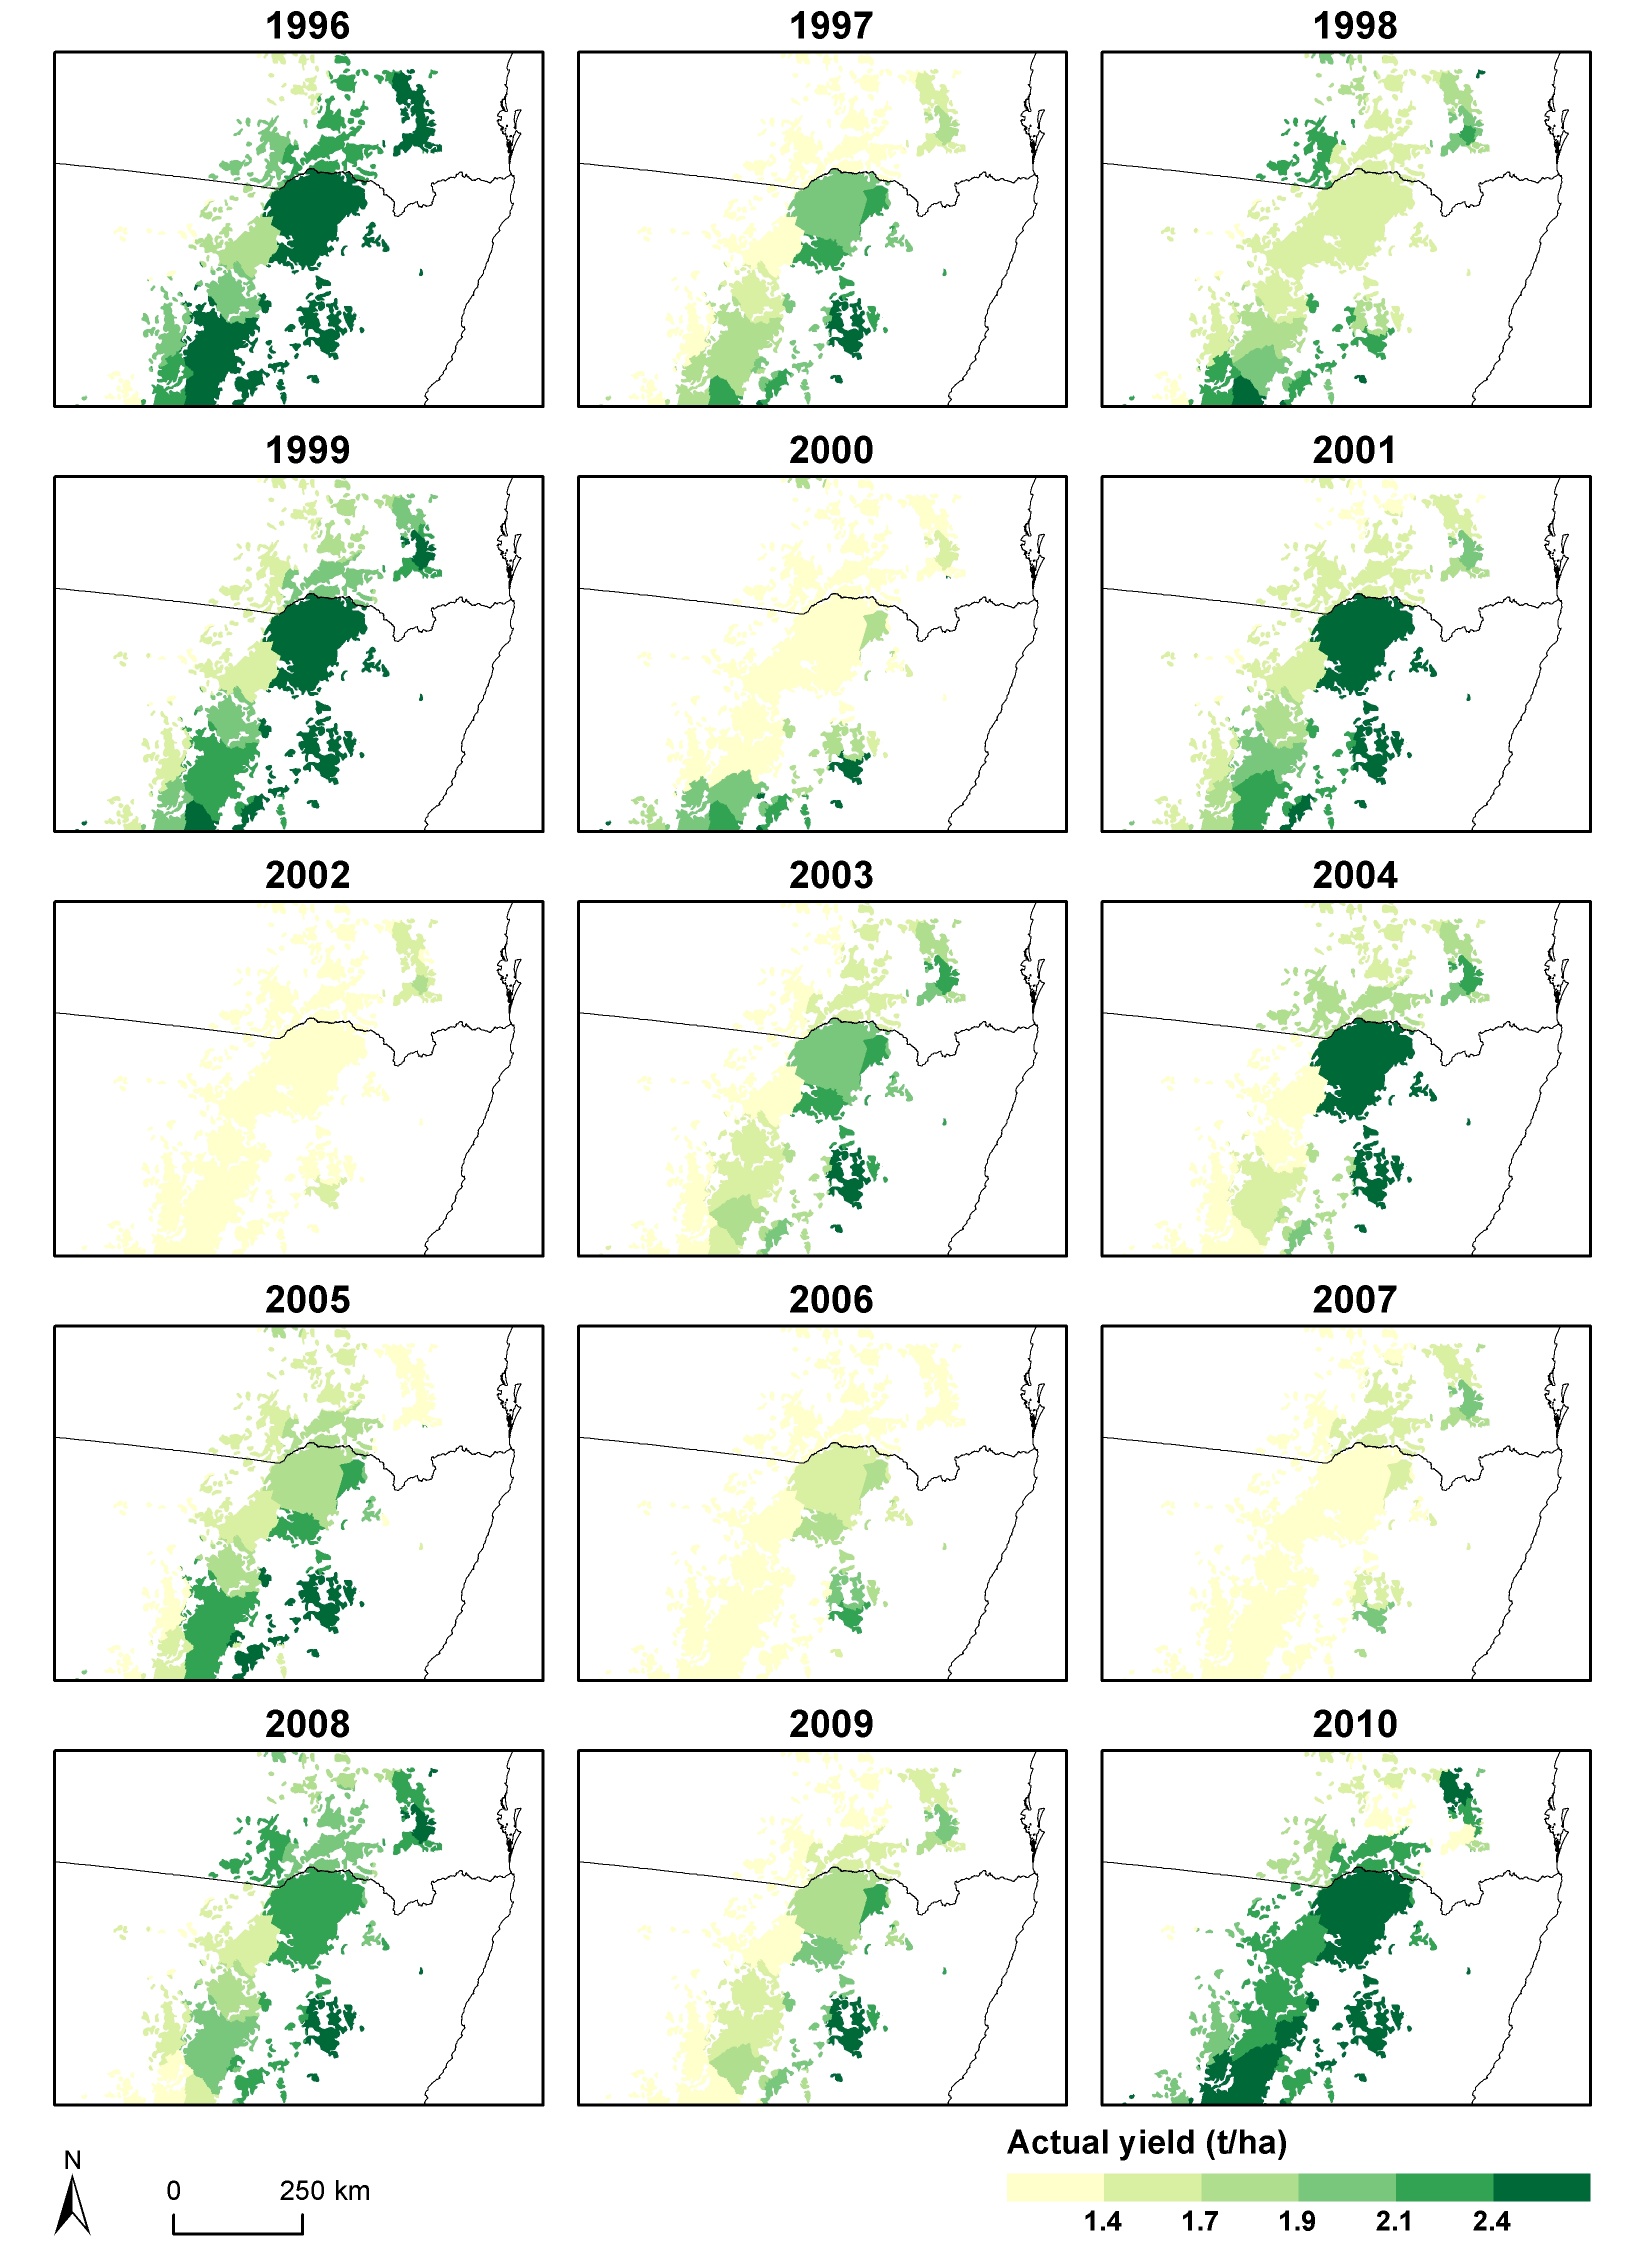 Results of the wheat grain yields in Australia's northern grain zone from 1996 to 2010 using a colour gradient to show yield. Text description follows image.